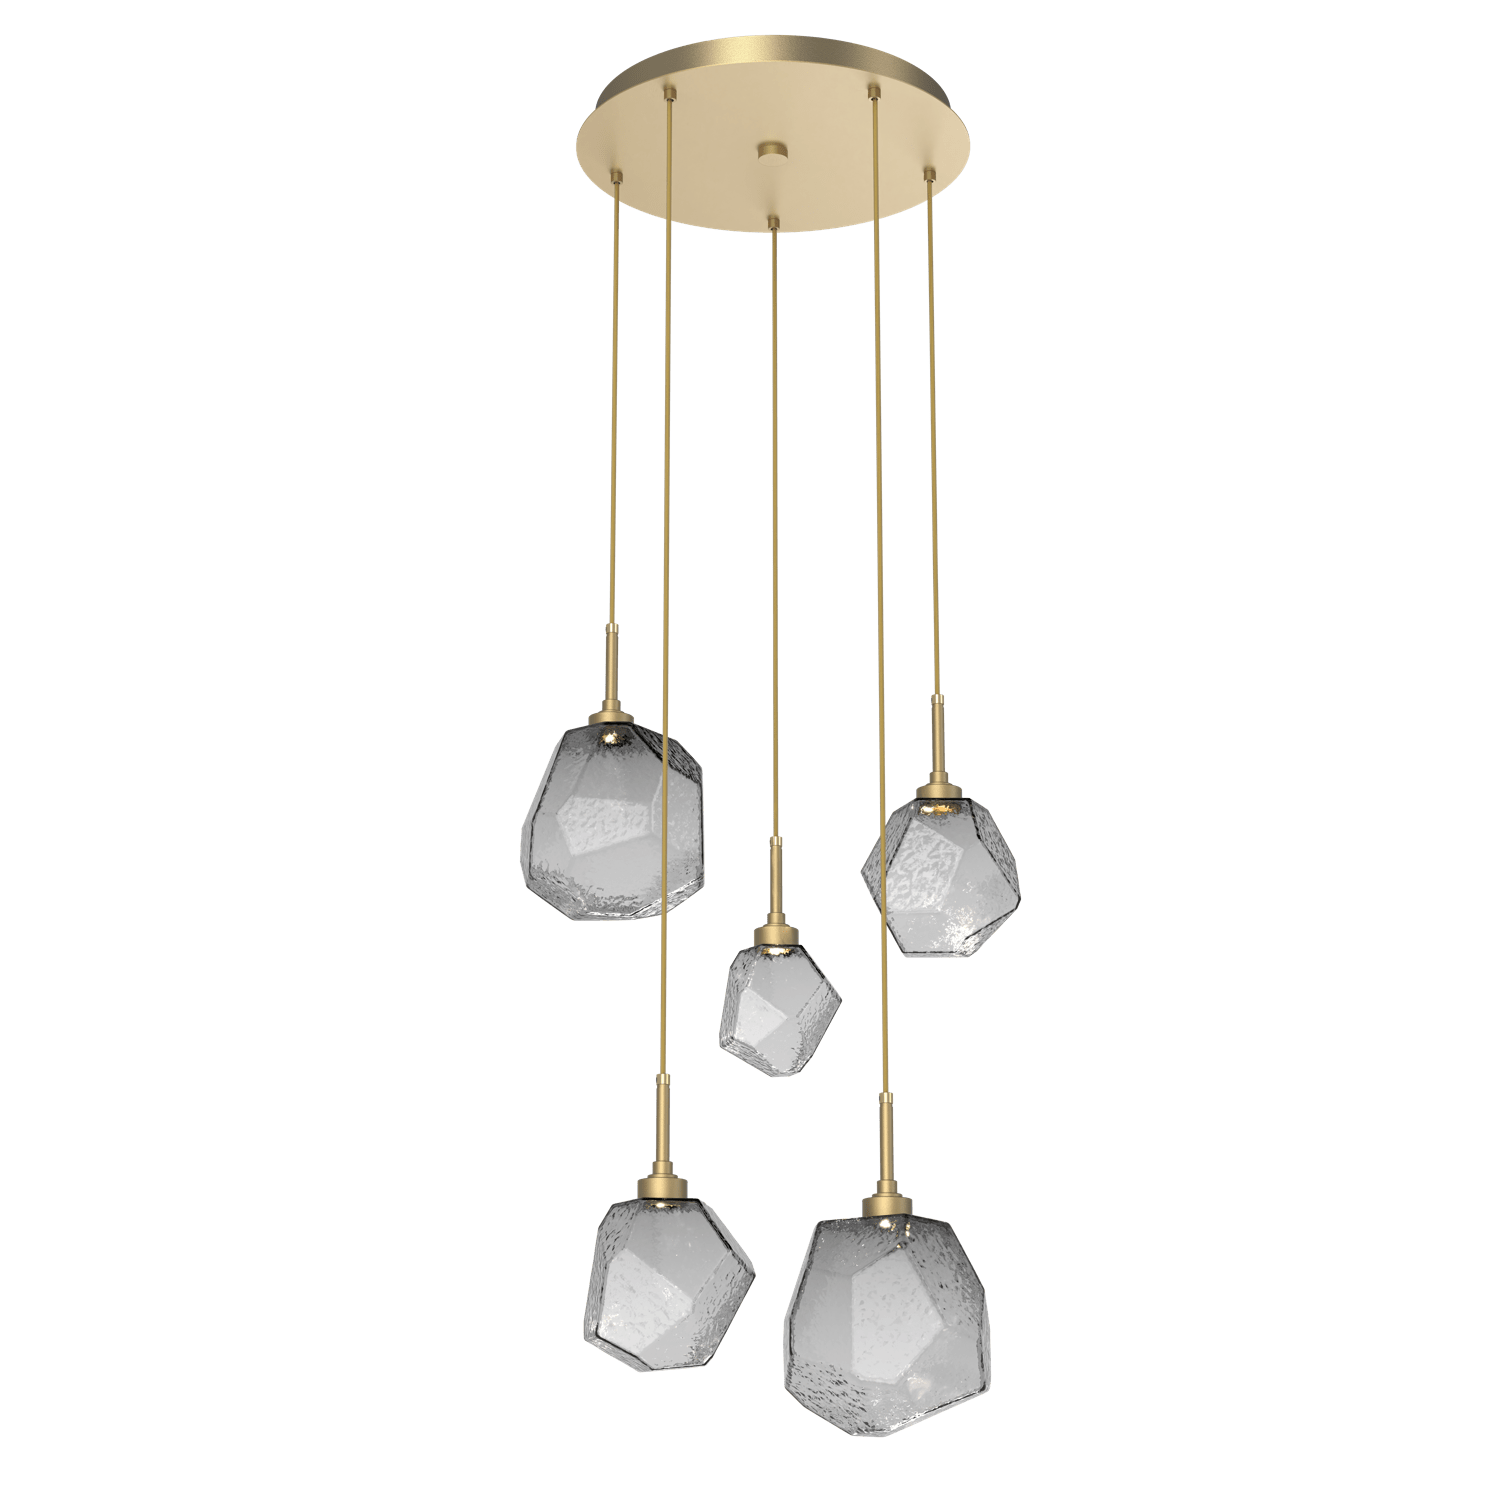 CHB0039-05-GB-S-Hammerton-Studio-Gem-5-light-round-pendant-chandelier-with-gilded-brass-finish-and-smoke-blown-glass-shades-and-LED-lamping